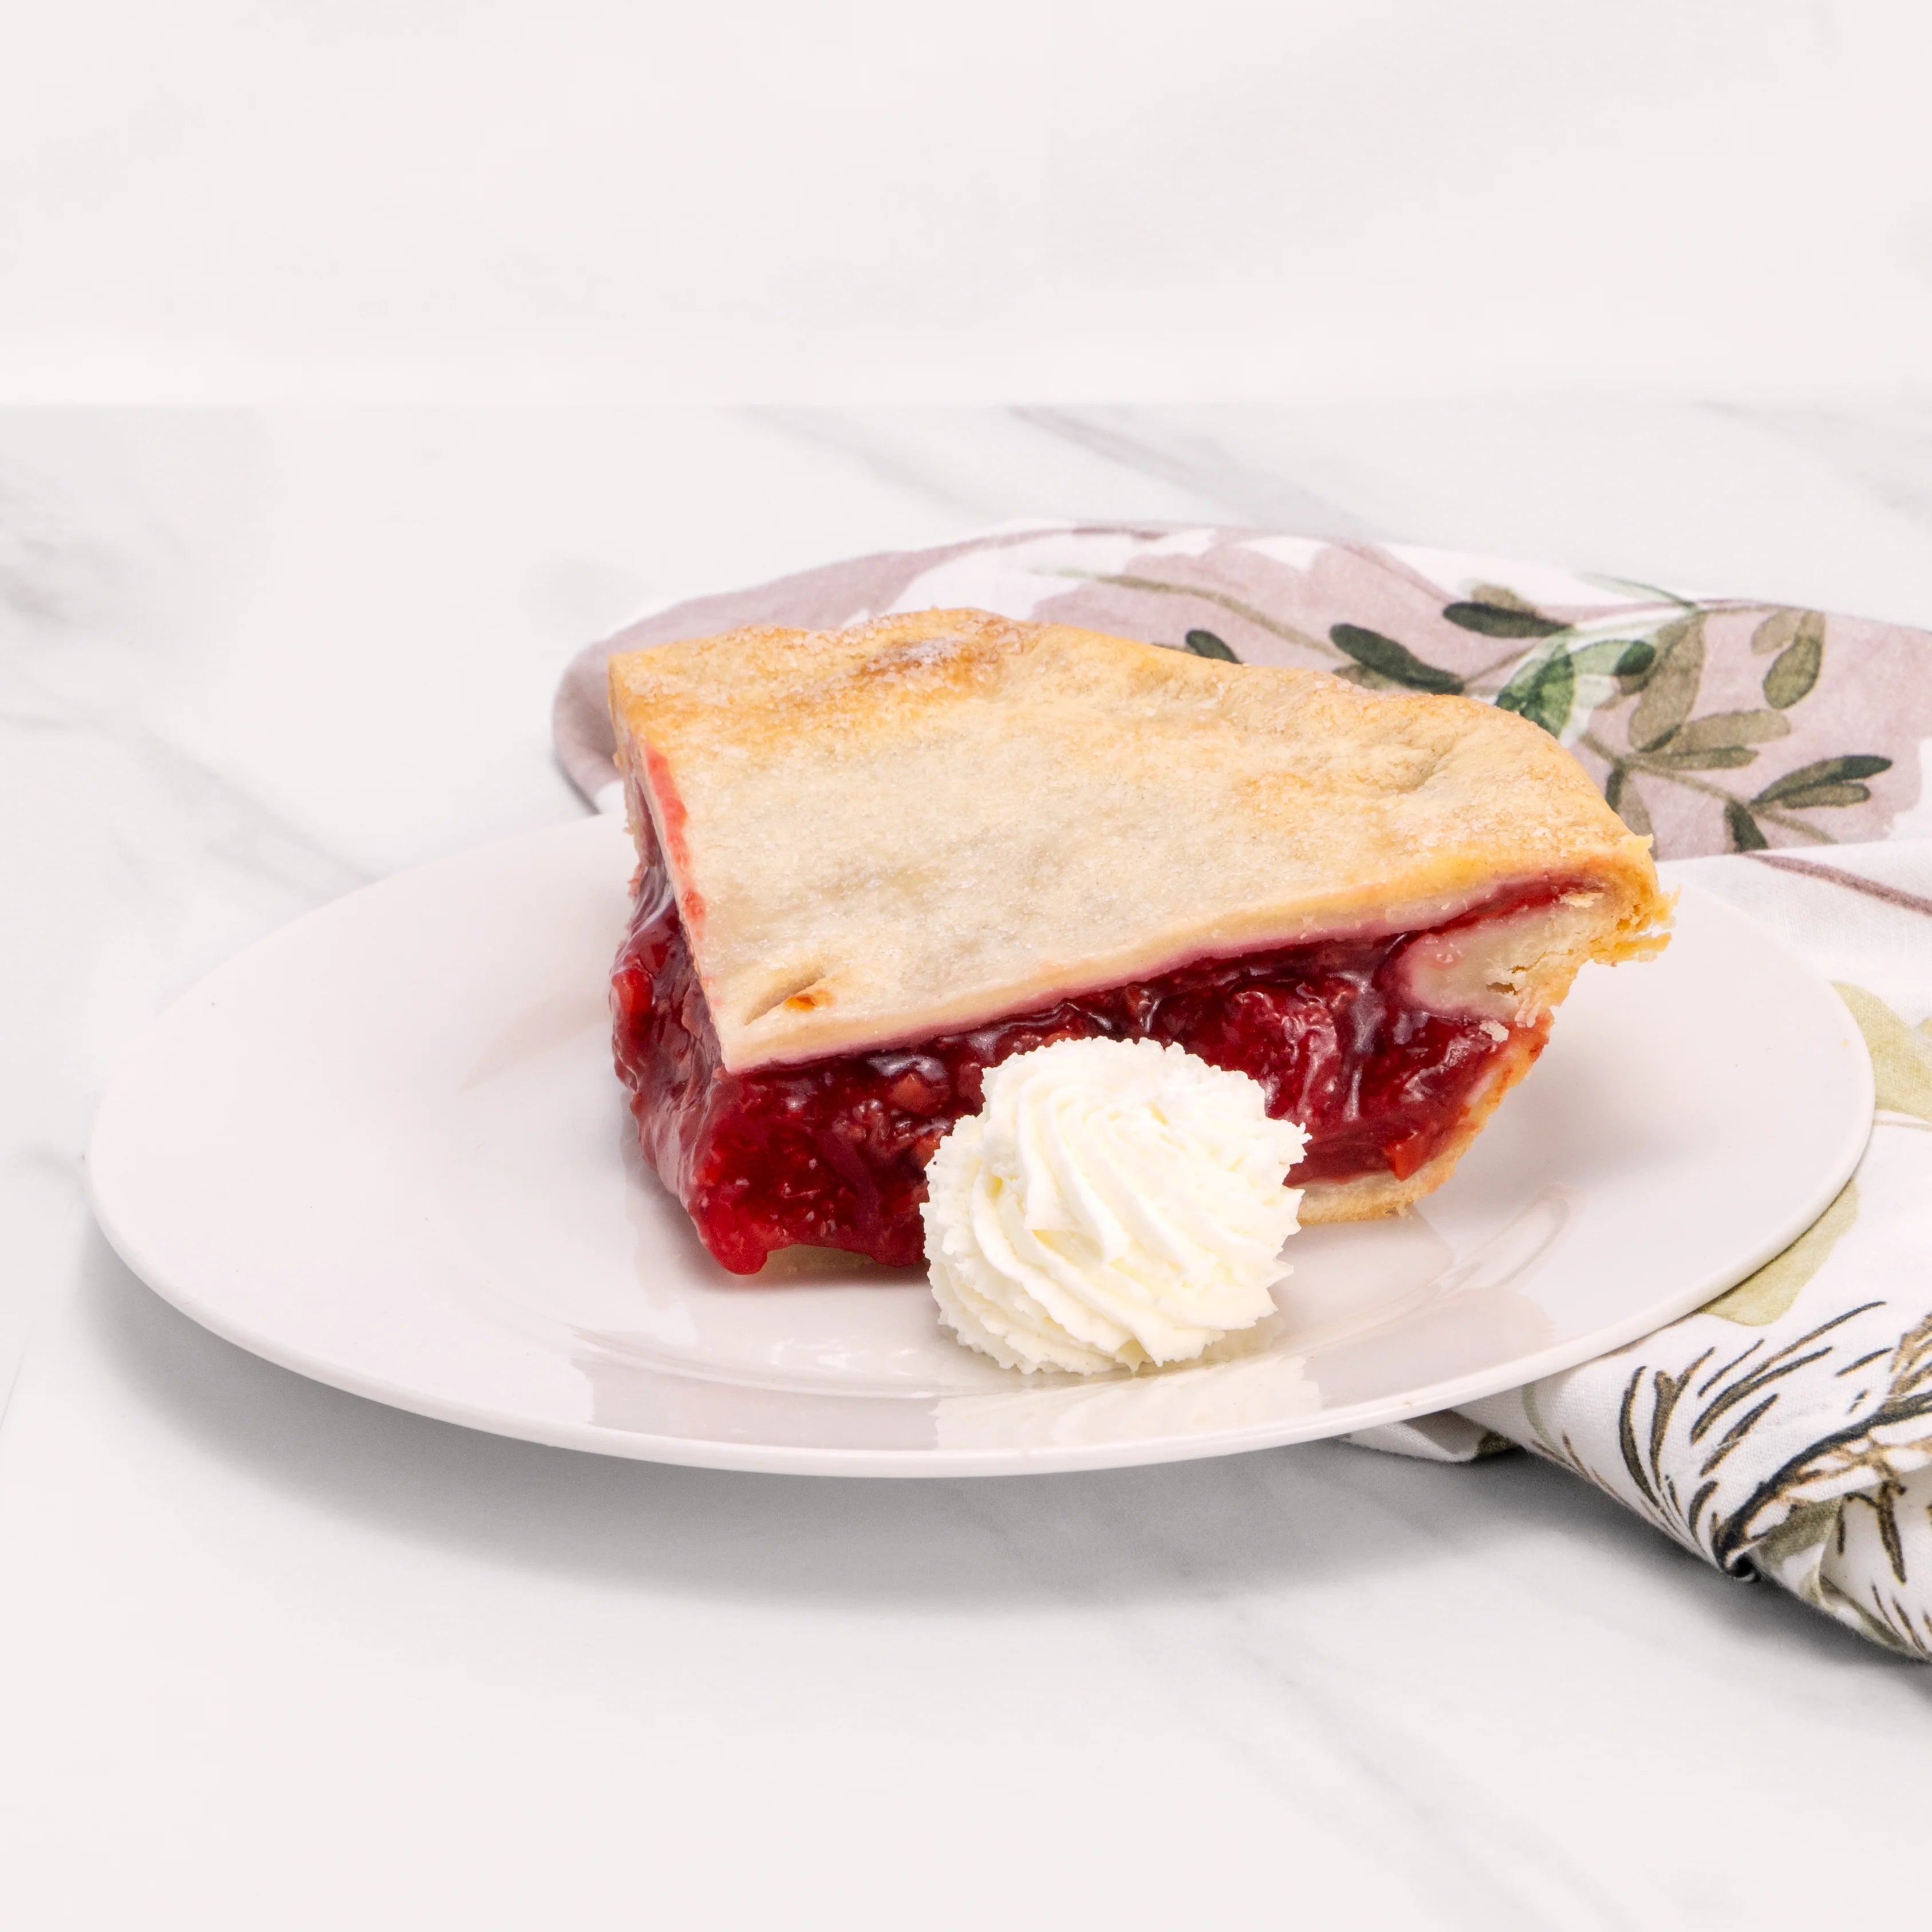 Slice of Lower Sugar Cherry Pie garnished with a dollop of crème.